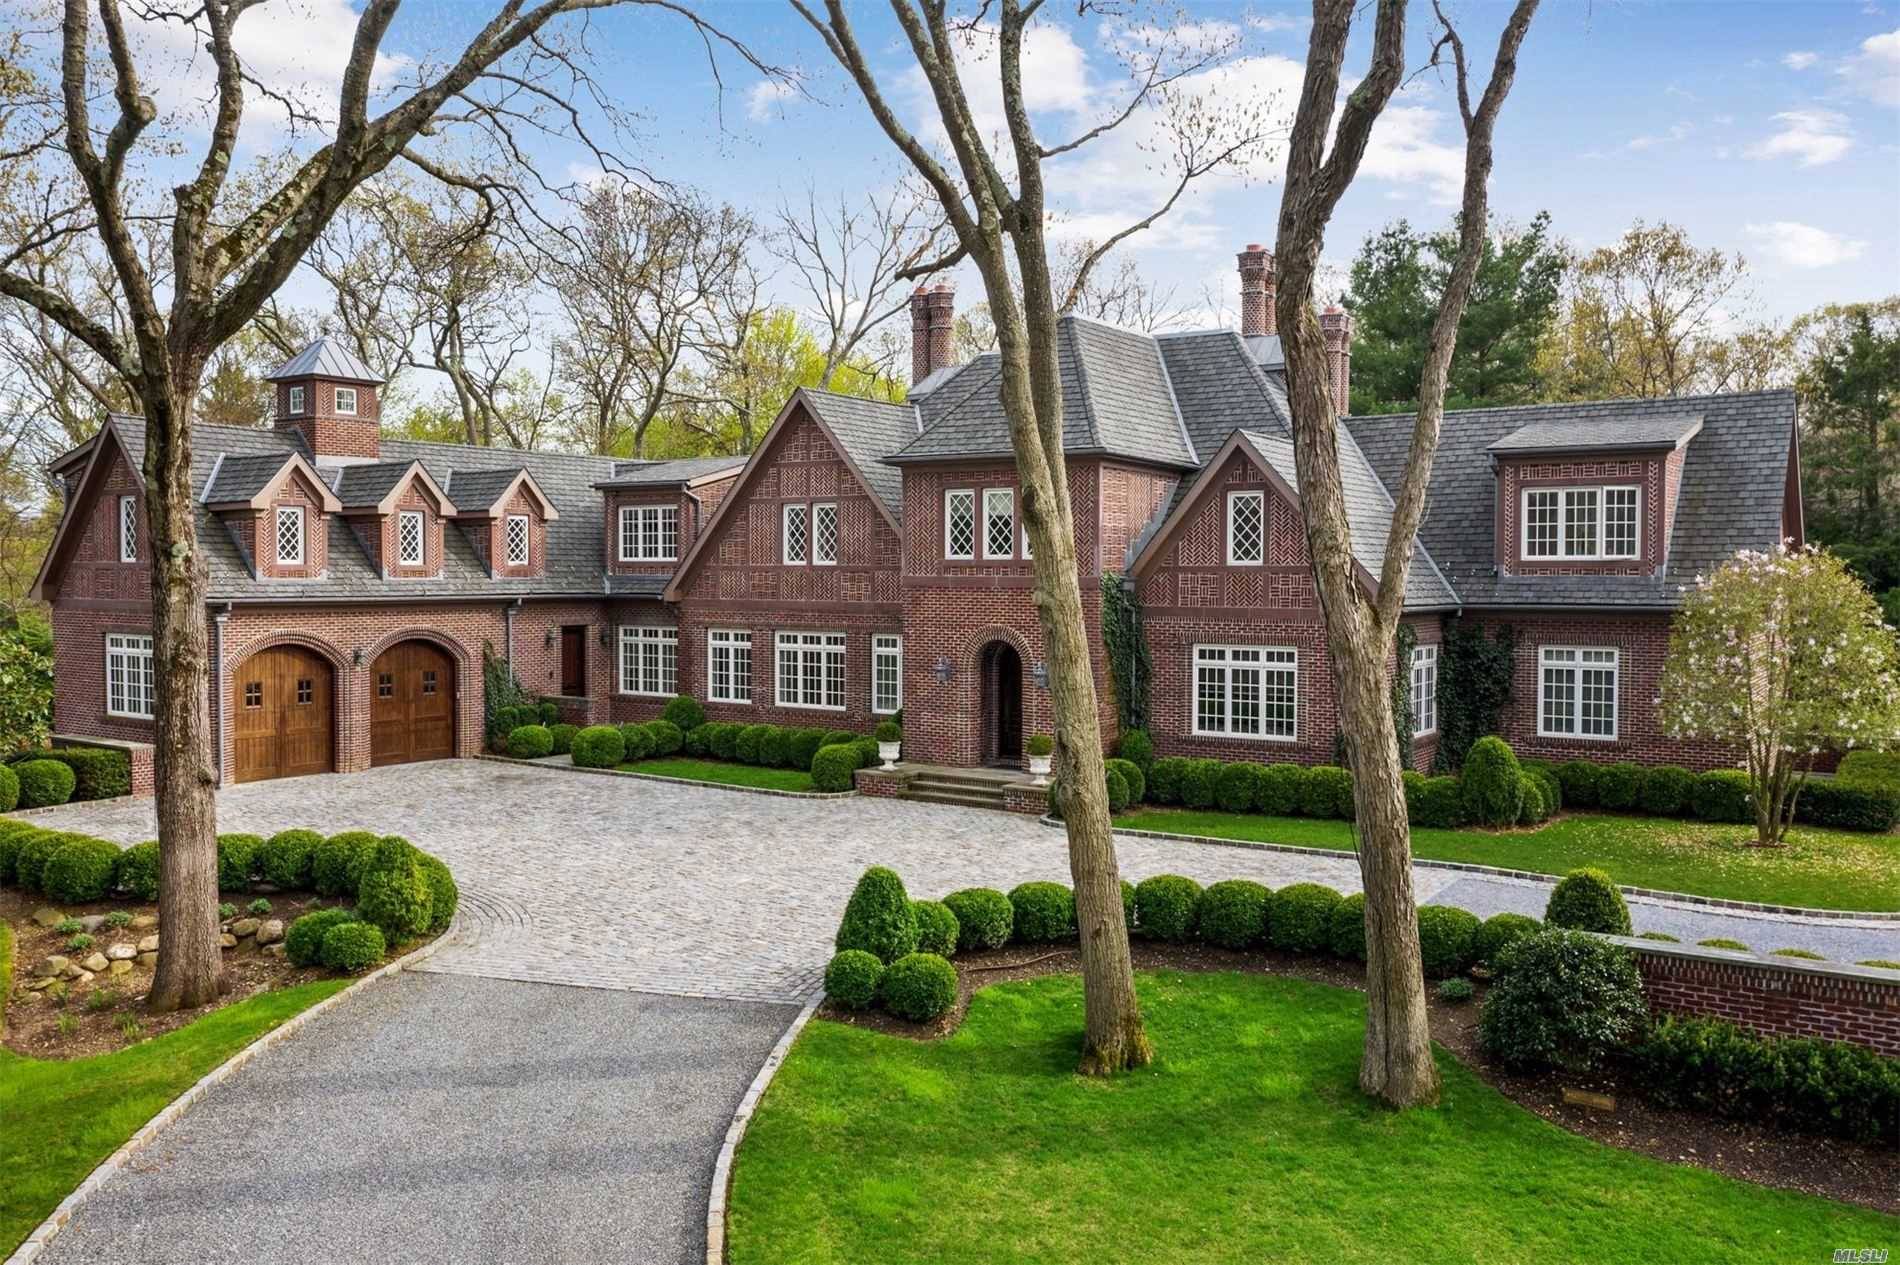 Absolutely stunning and unique 7500 sq ft stately brick tudor style home on 2 lush, private acres with 1, 000 sq ft Studio Pool House w Fp, Kit, Bth and ...